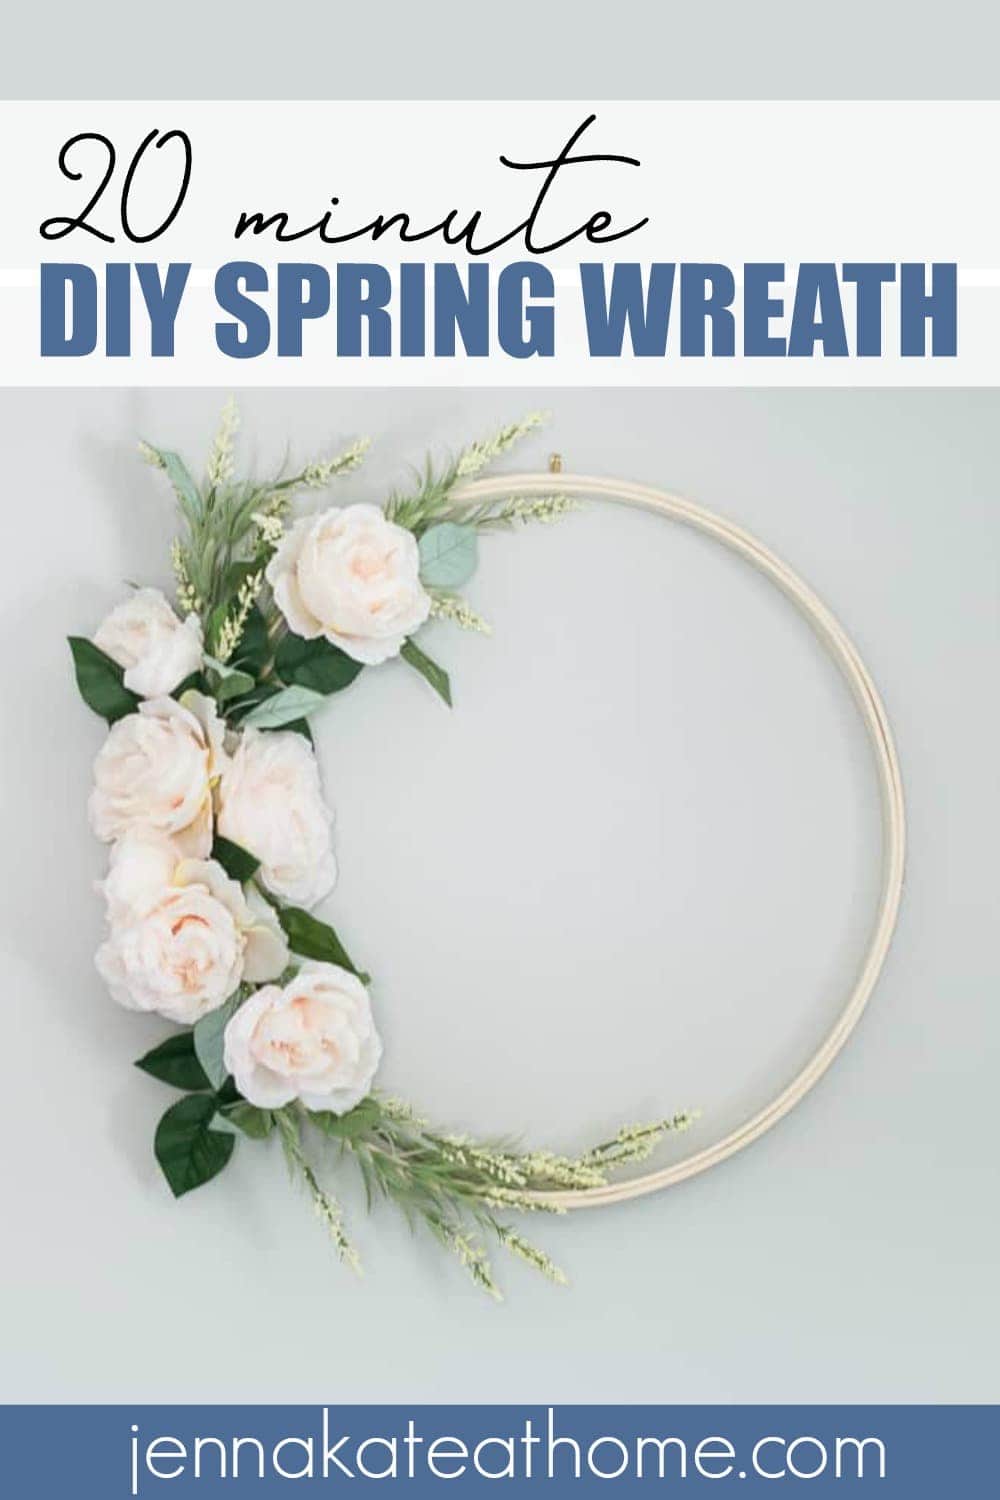 This easy DIY spring wreath takes only 20 minutes to make and will look perfect on your front door or anywhere in your home!